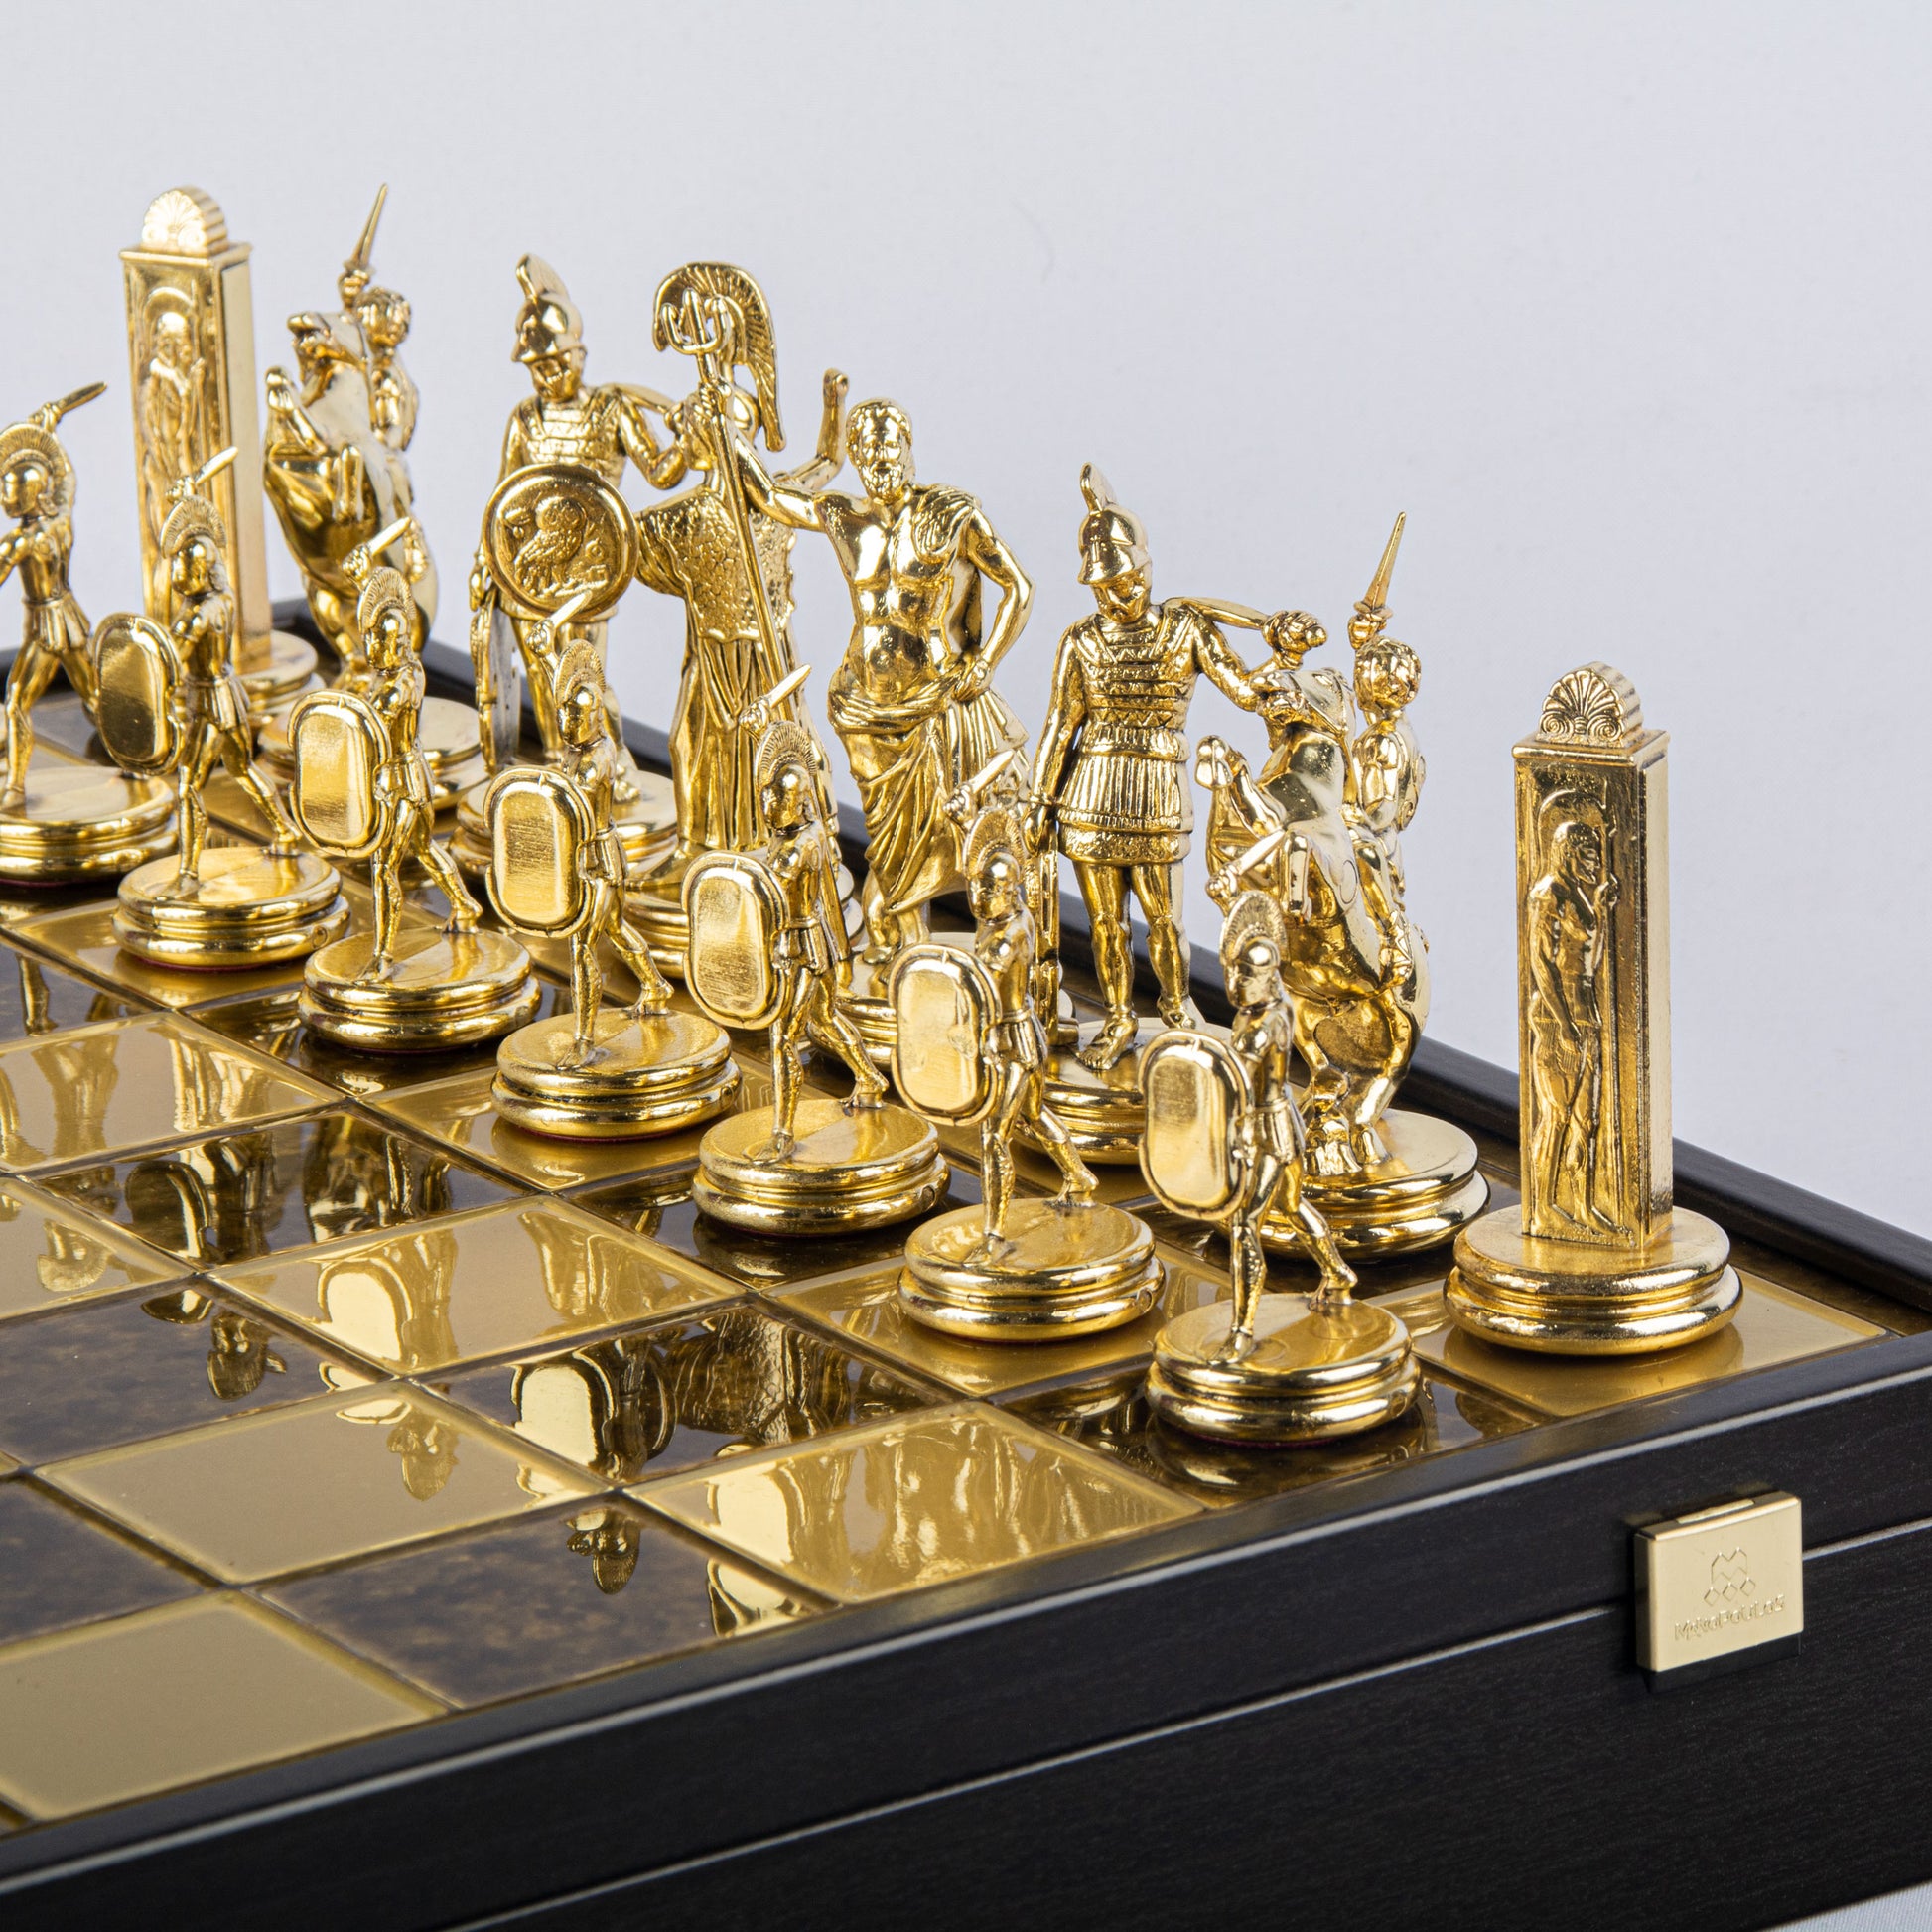 GREEK MYTHOLOGY CHESS SET in wooden box with gold/brown chessmen and bronze chessboard 48 x 48cm (Extra Large) - Premium Chess from MANOPOULOS Chess & Backgammon - Just €469! Shop now at MANOPOULOS Chess & Backgammon